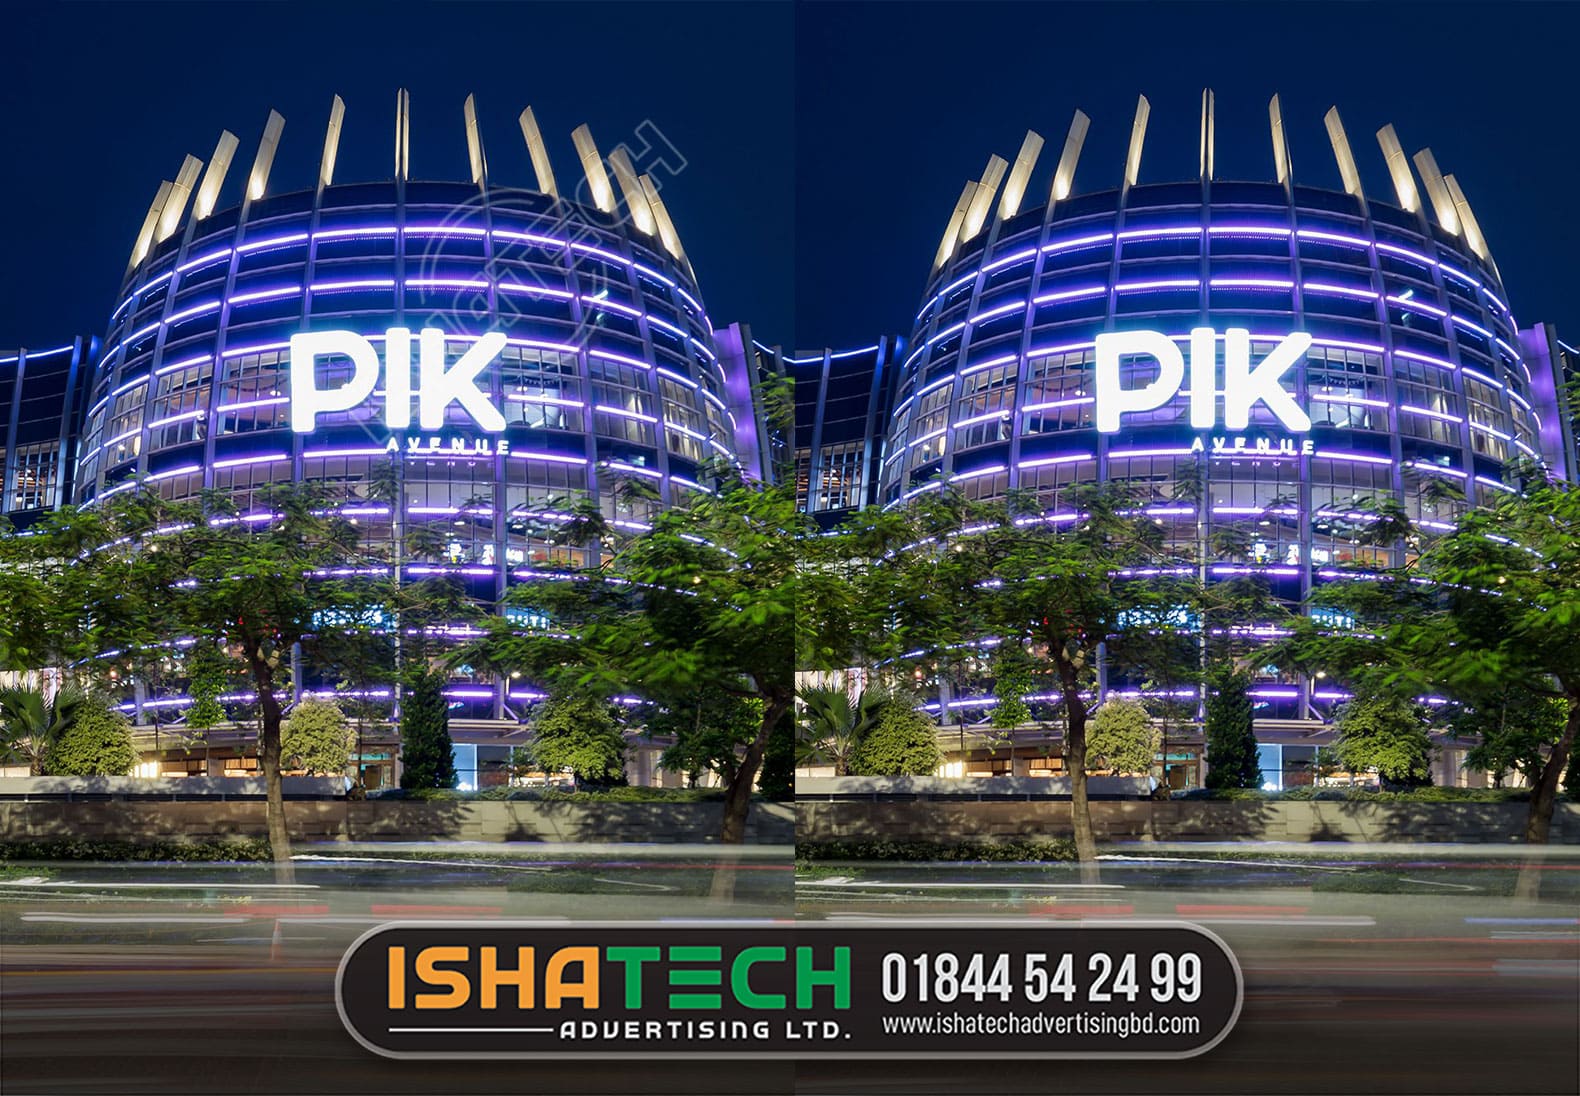 SHOPPING MALL OUTDOOR LED WHITE COLOR LETTER SIGNS BY ISHATECH ADVERTISING LTD. ADVERTISING AGENCY IN BANGLADESH.